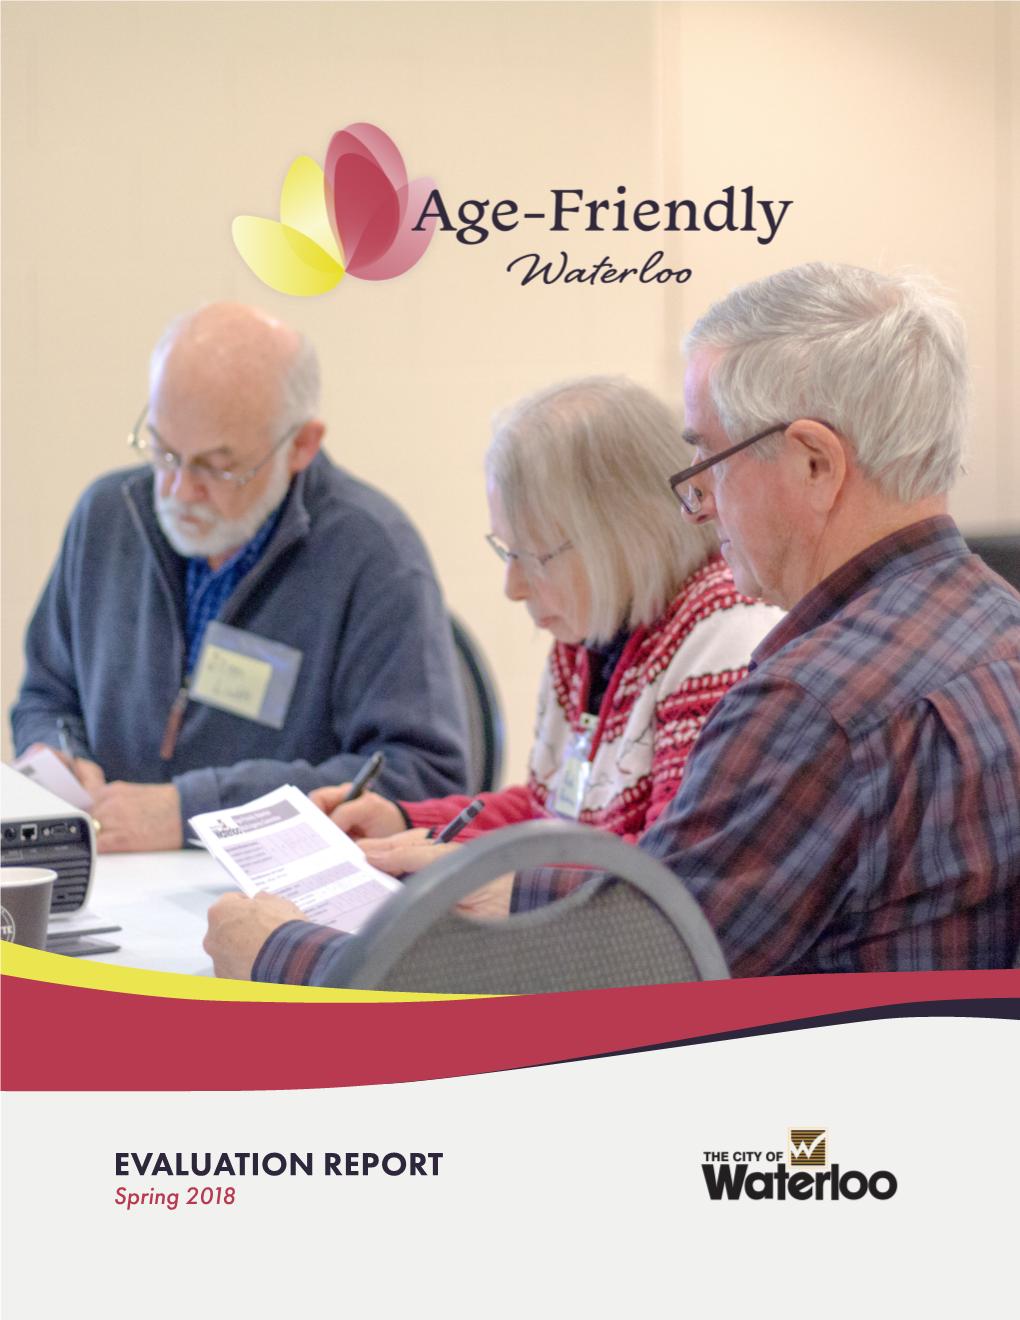 Age-Friendly Waterloo Evaluation Report, Spring 2018